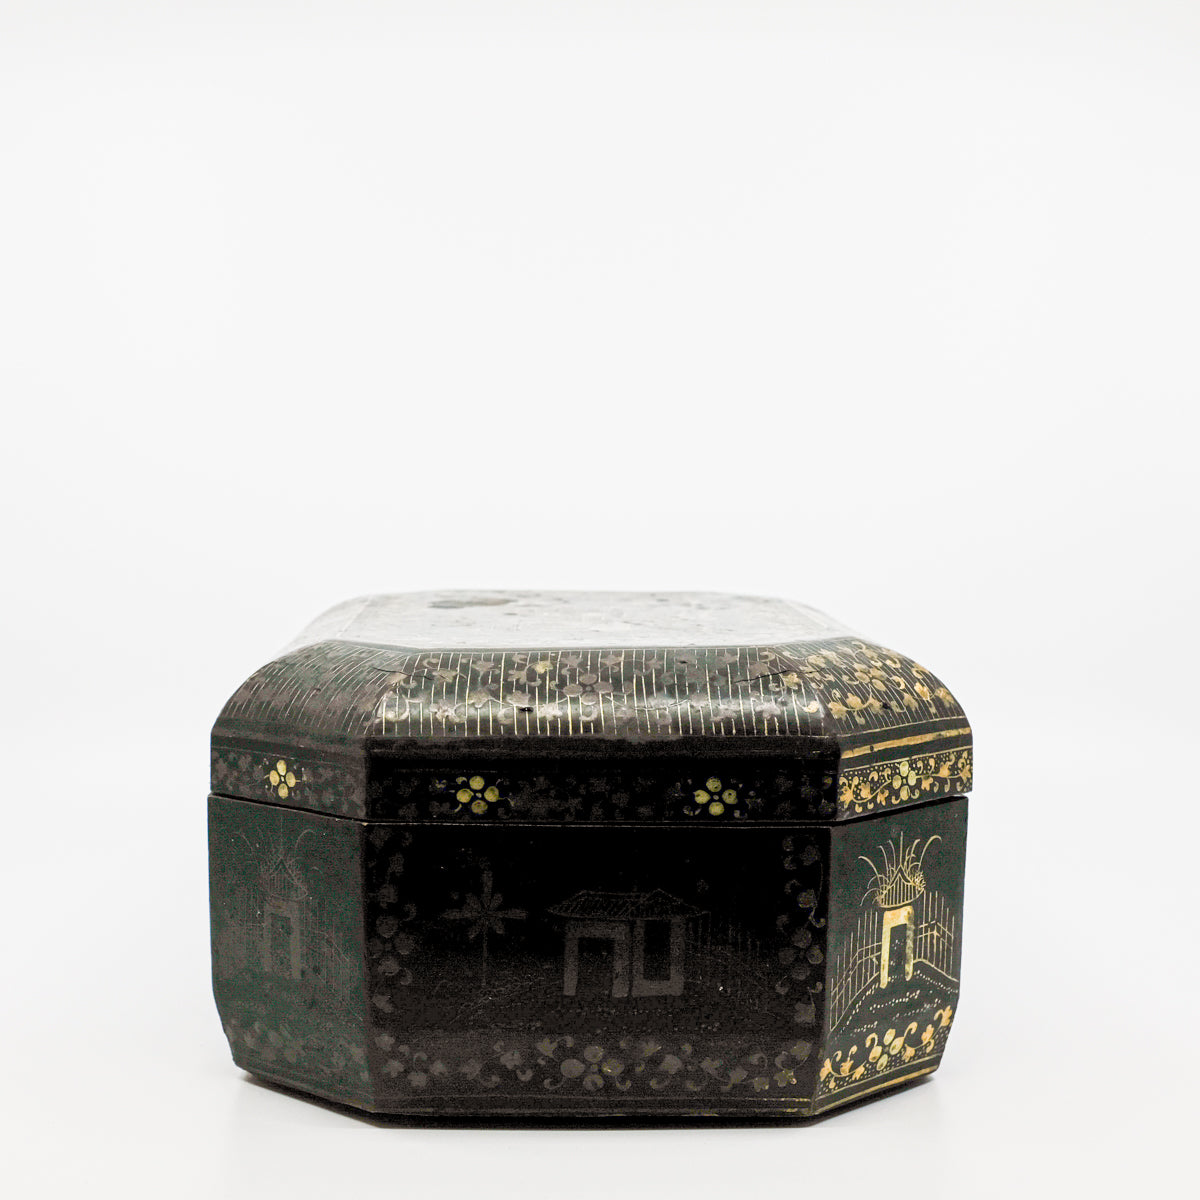 end view of black and gold paper marche lidded box